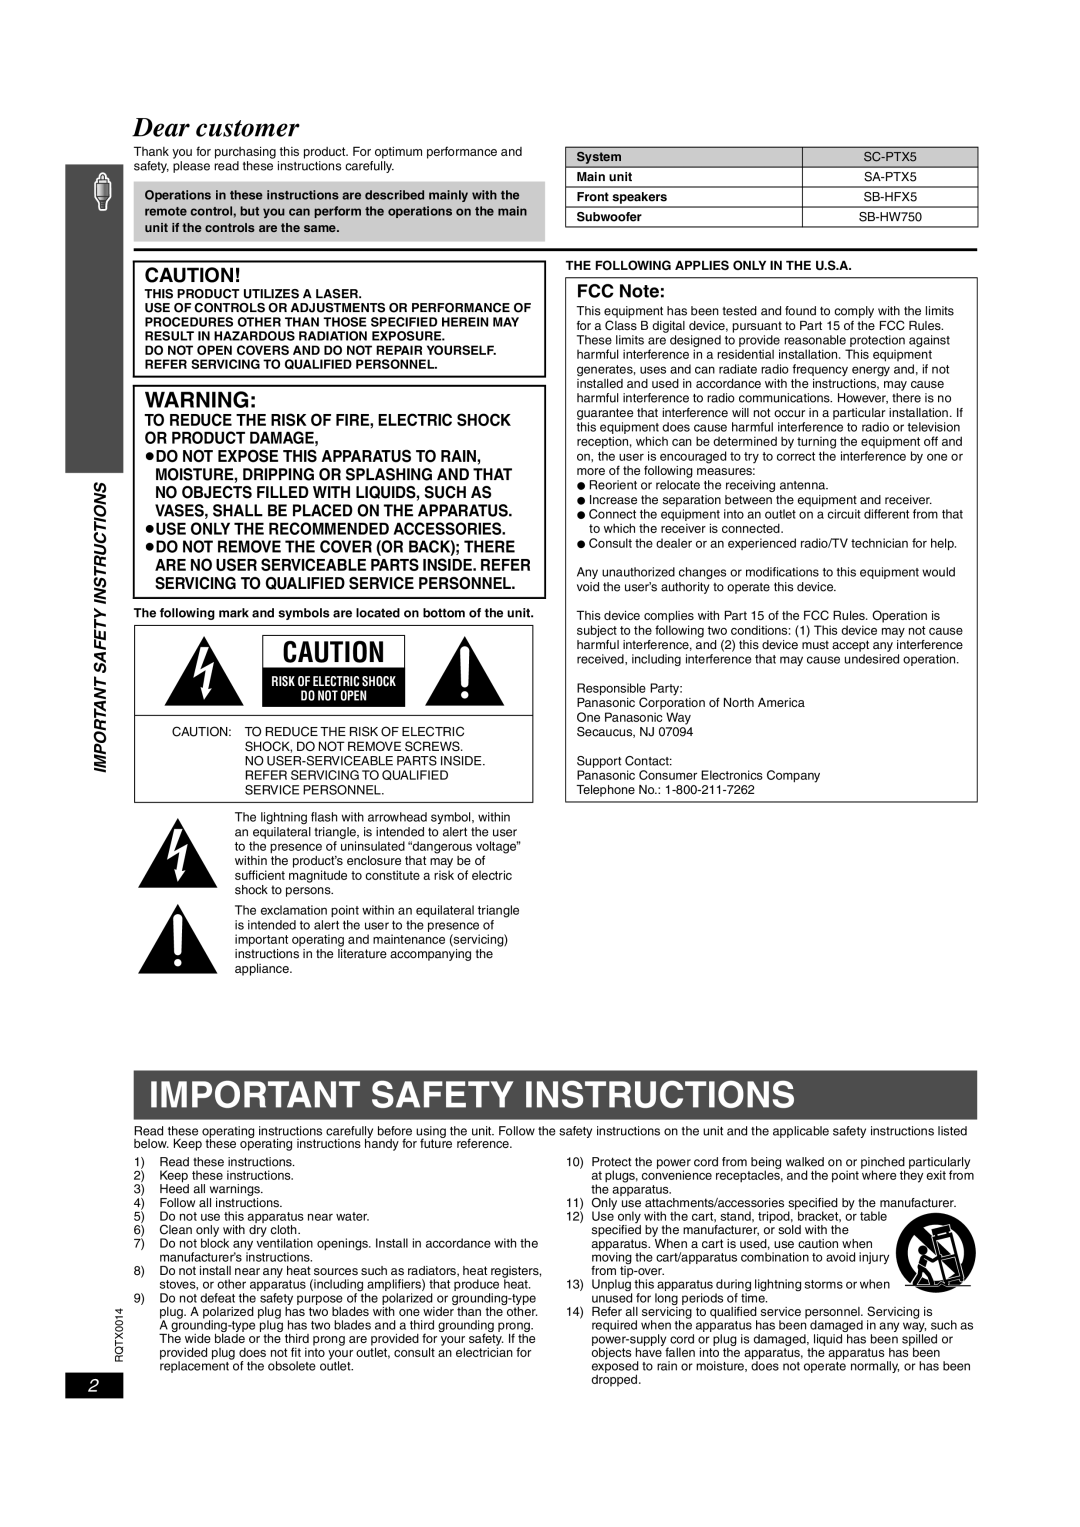 Panasonic SC-PTX5 manual FCC Note, Important Safety Instructions, ≥Do Not Expose This Apparatus To Rain 